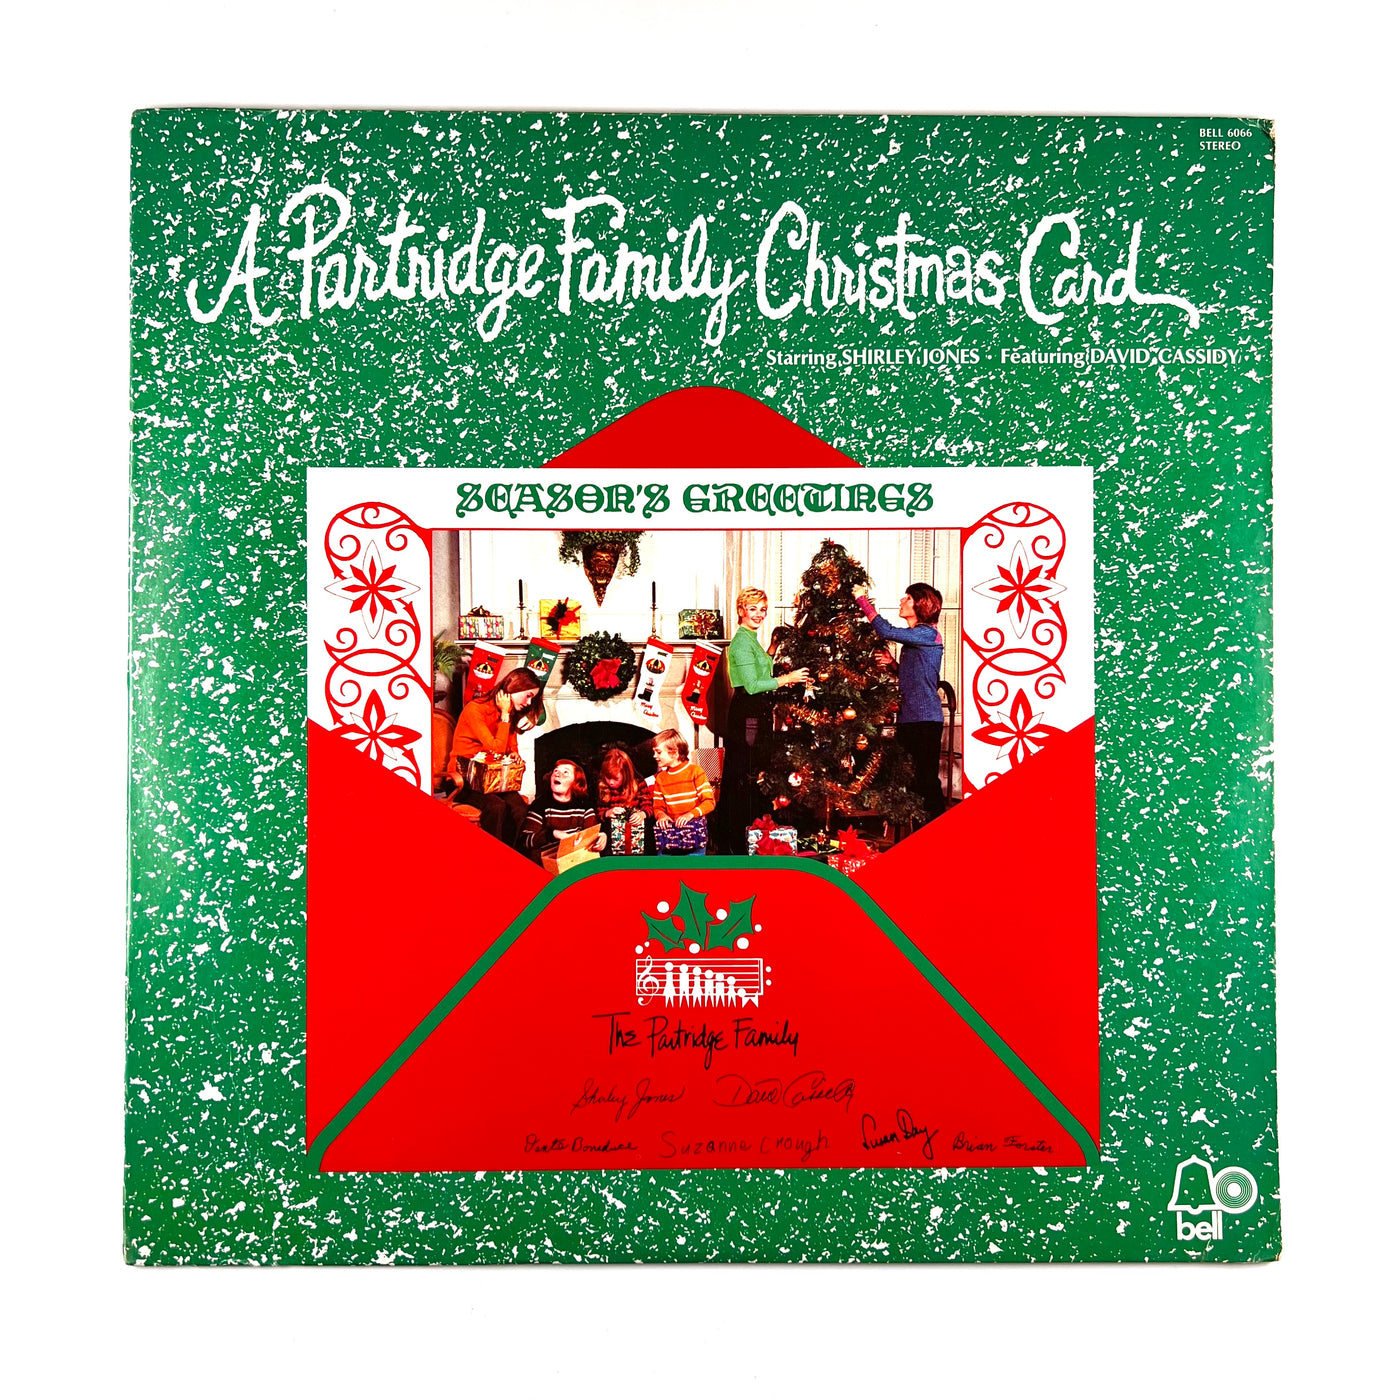 The Partridge Family Starring Shirley Jones Featuring David Cassidy - A Partridge Family Christmas Card